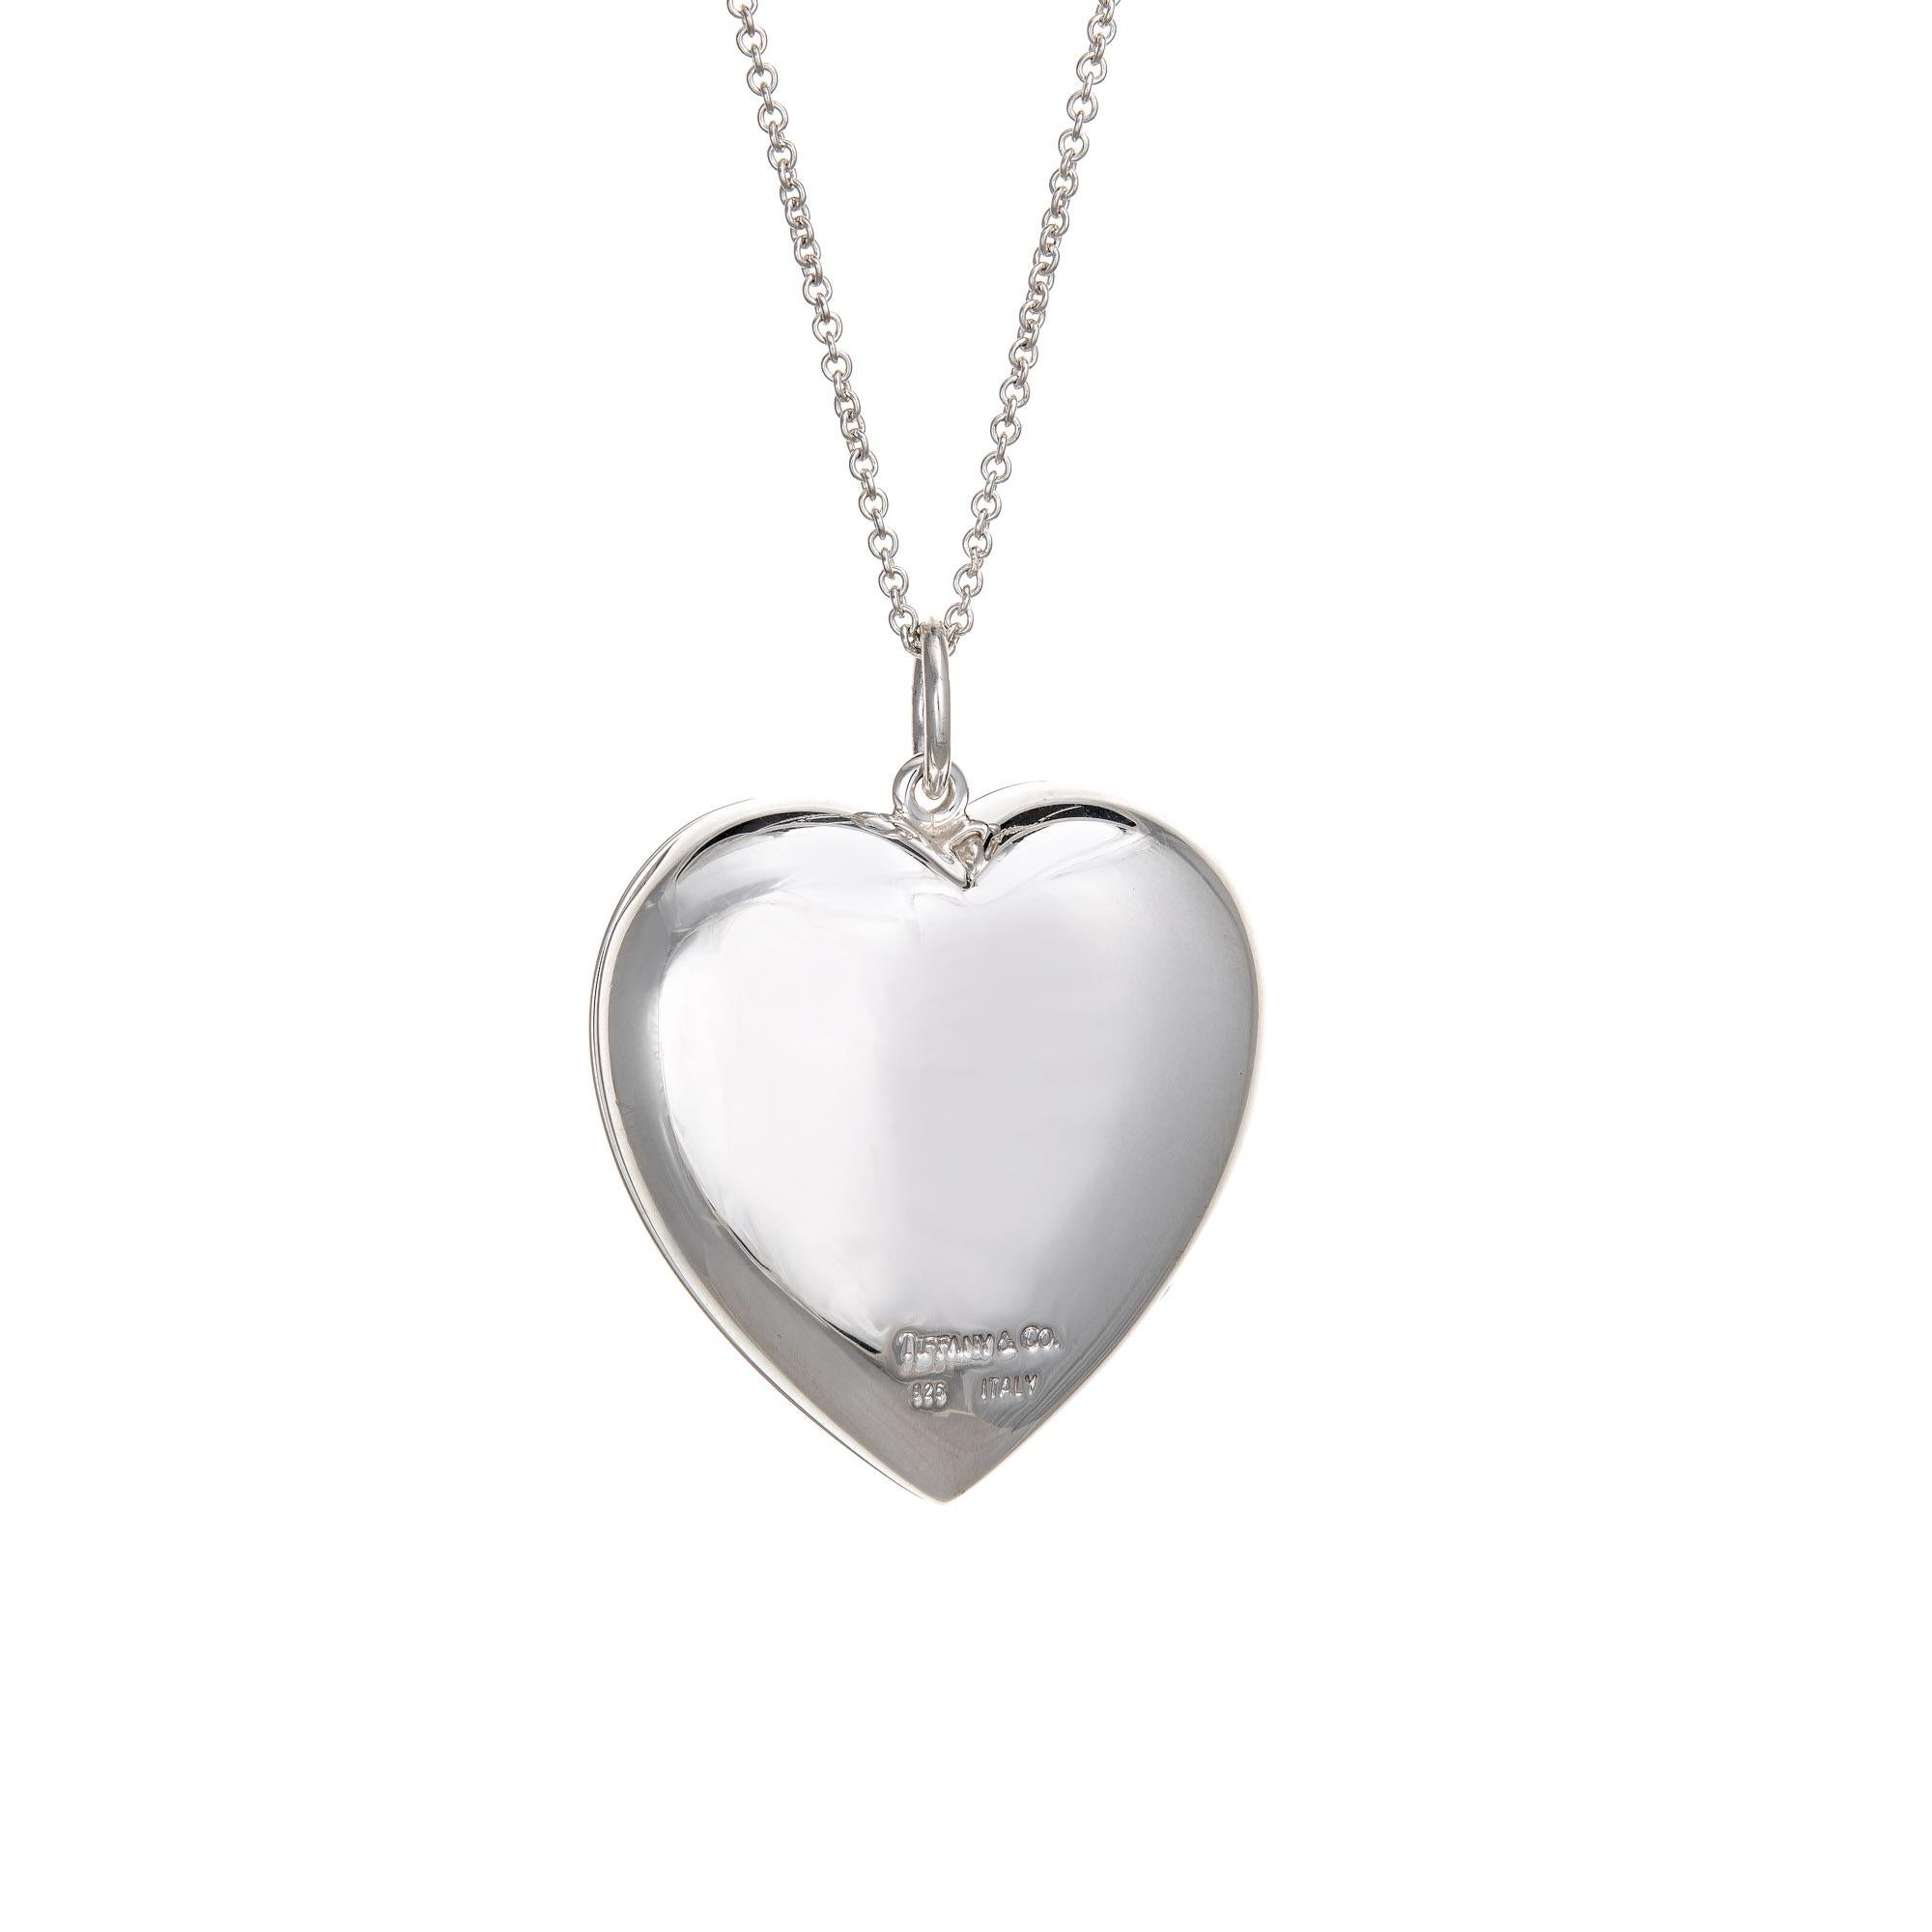 Elegant and finely detailed vintage Tiffany & Co sterling silver heart locket + necklace.  

The puffed heart is large in scale (1.45 inches) and open to accommodate a photo or keepsake. Also included is the fine link Tiffany & Co chain measuring 16